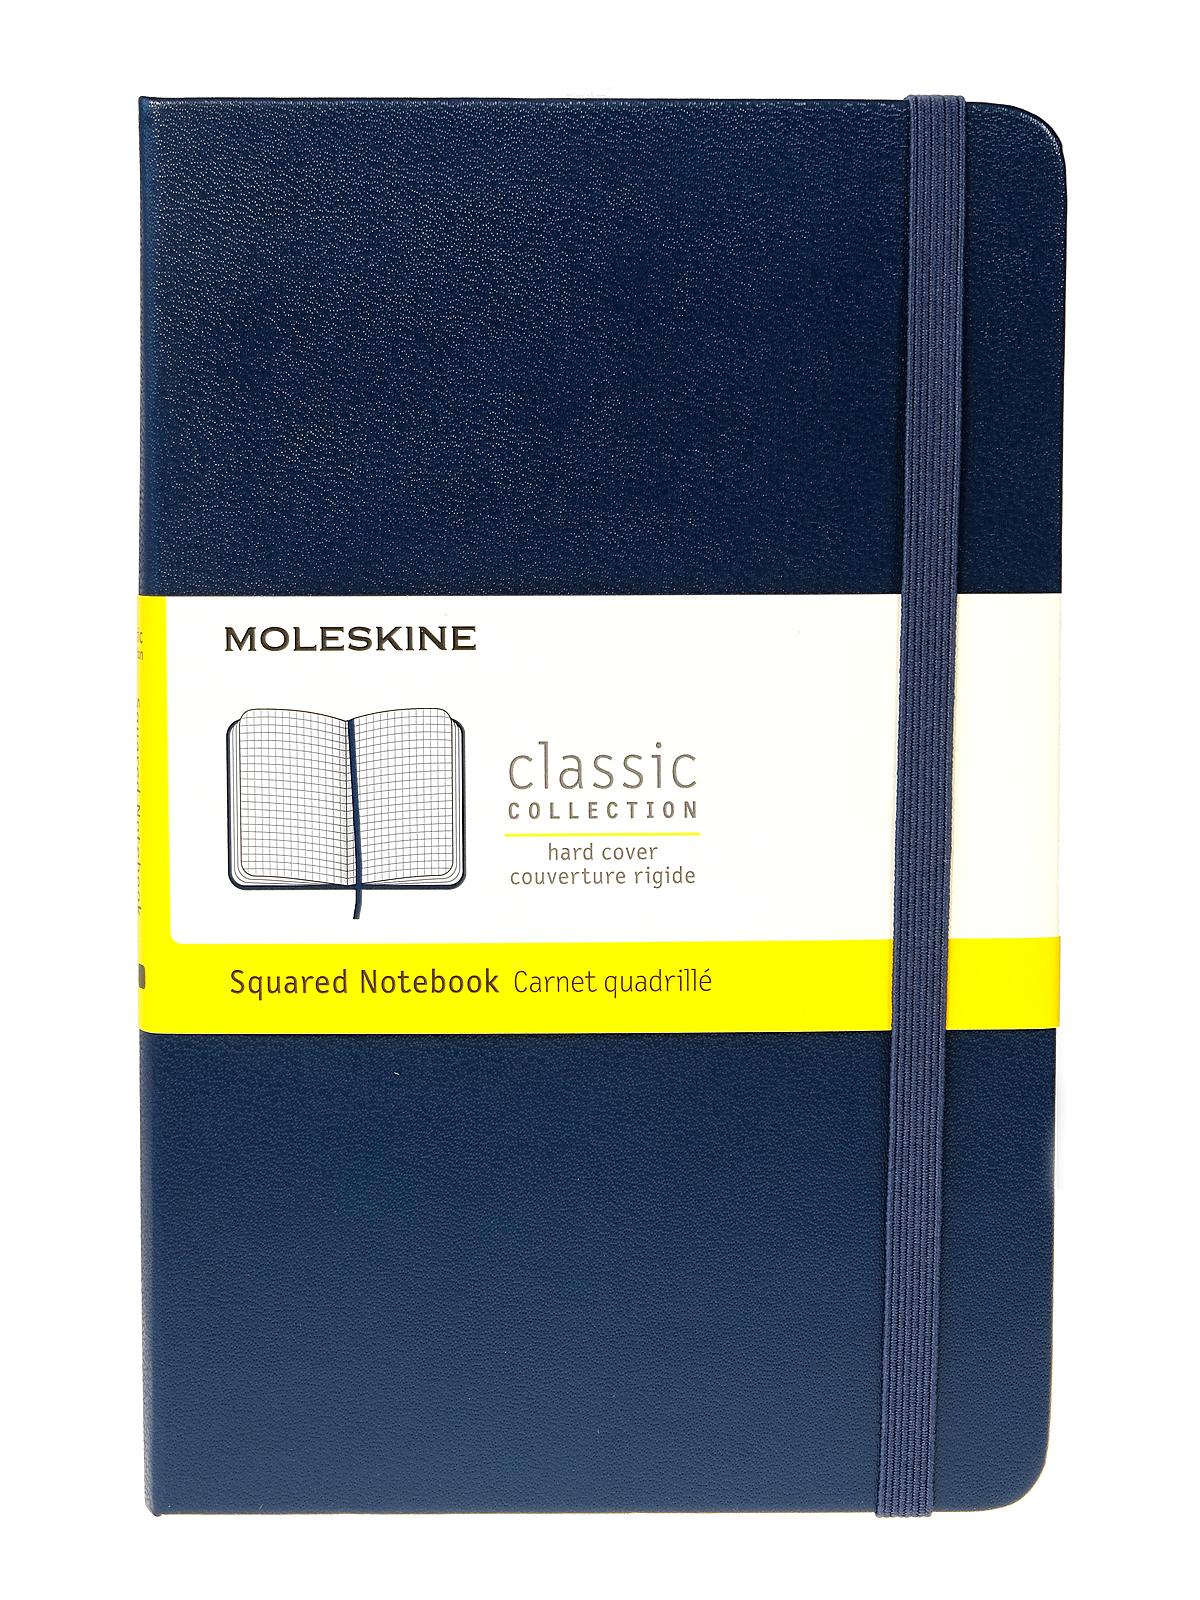 Classic Hard Cover Notebooks Sapphire Blue 4 1 2 In. X 7 In. 208 Pages, Squared